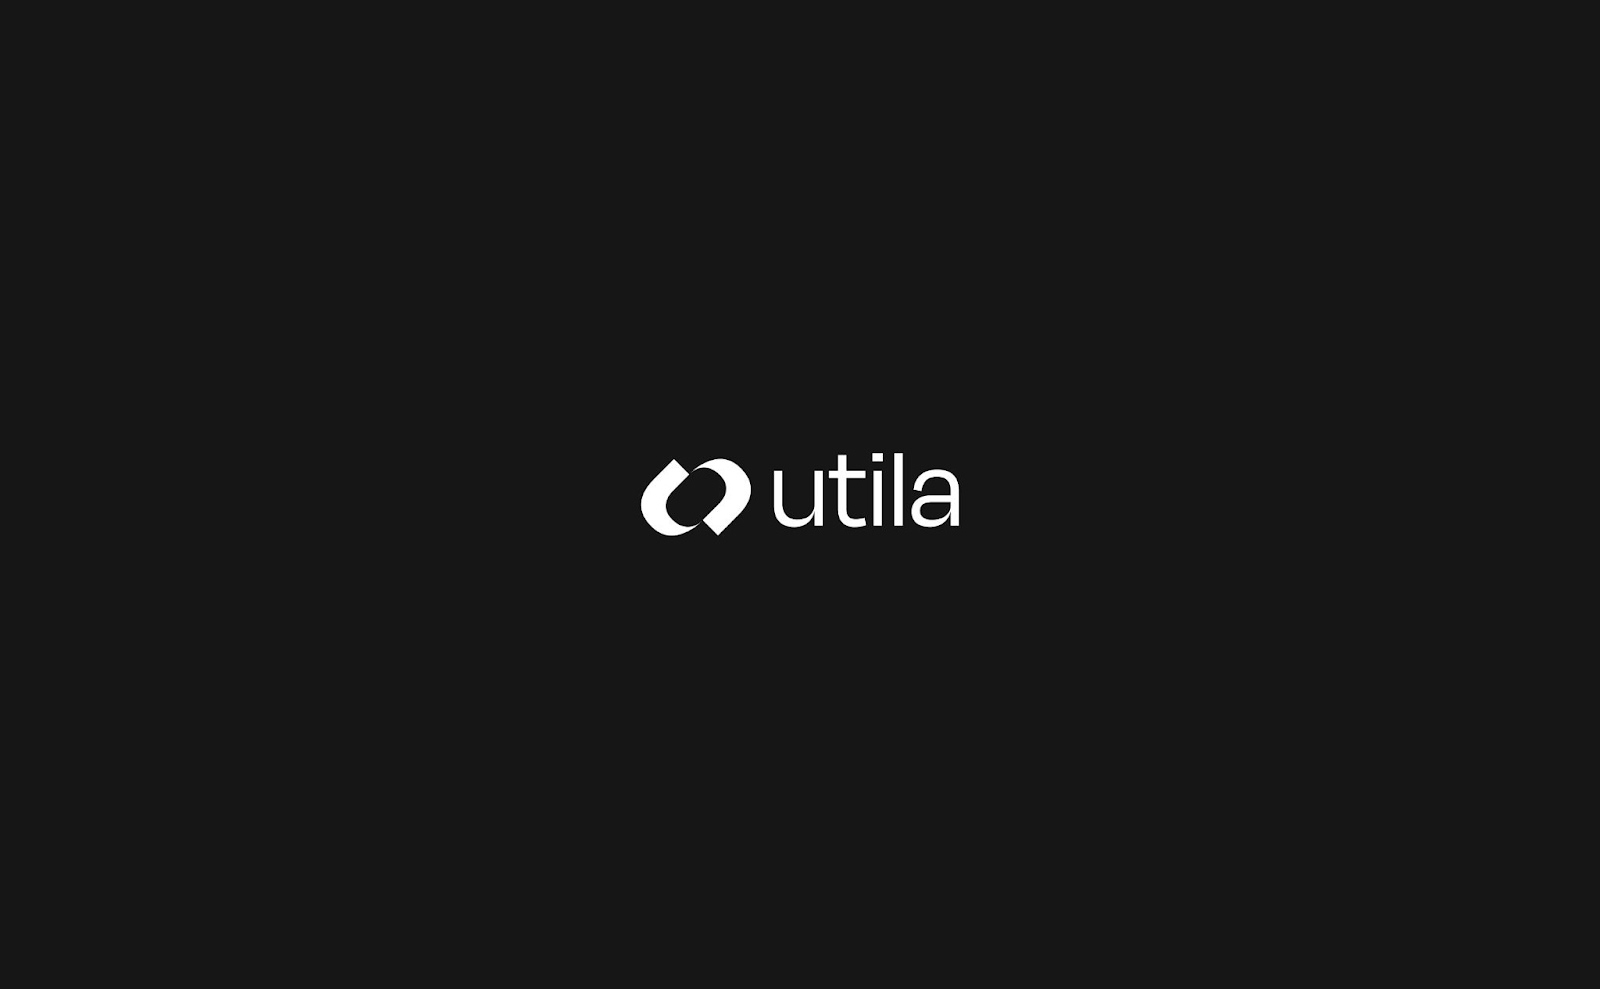  Artifact from Branding and Visual Identity: Unveiling Utila's Secure Design by Under Studio